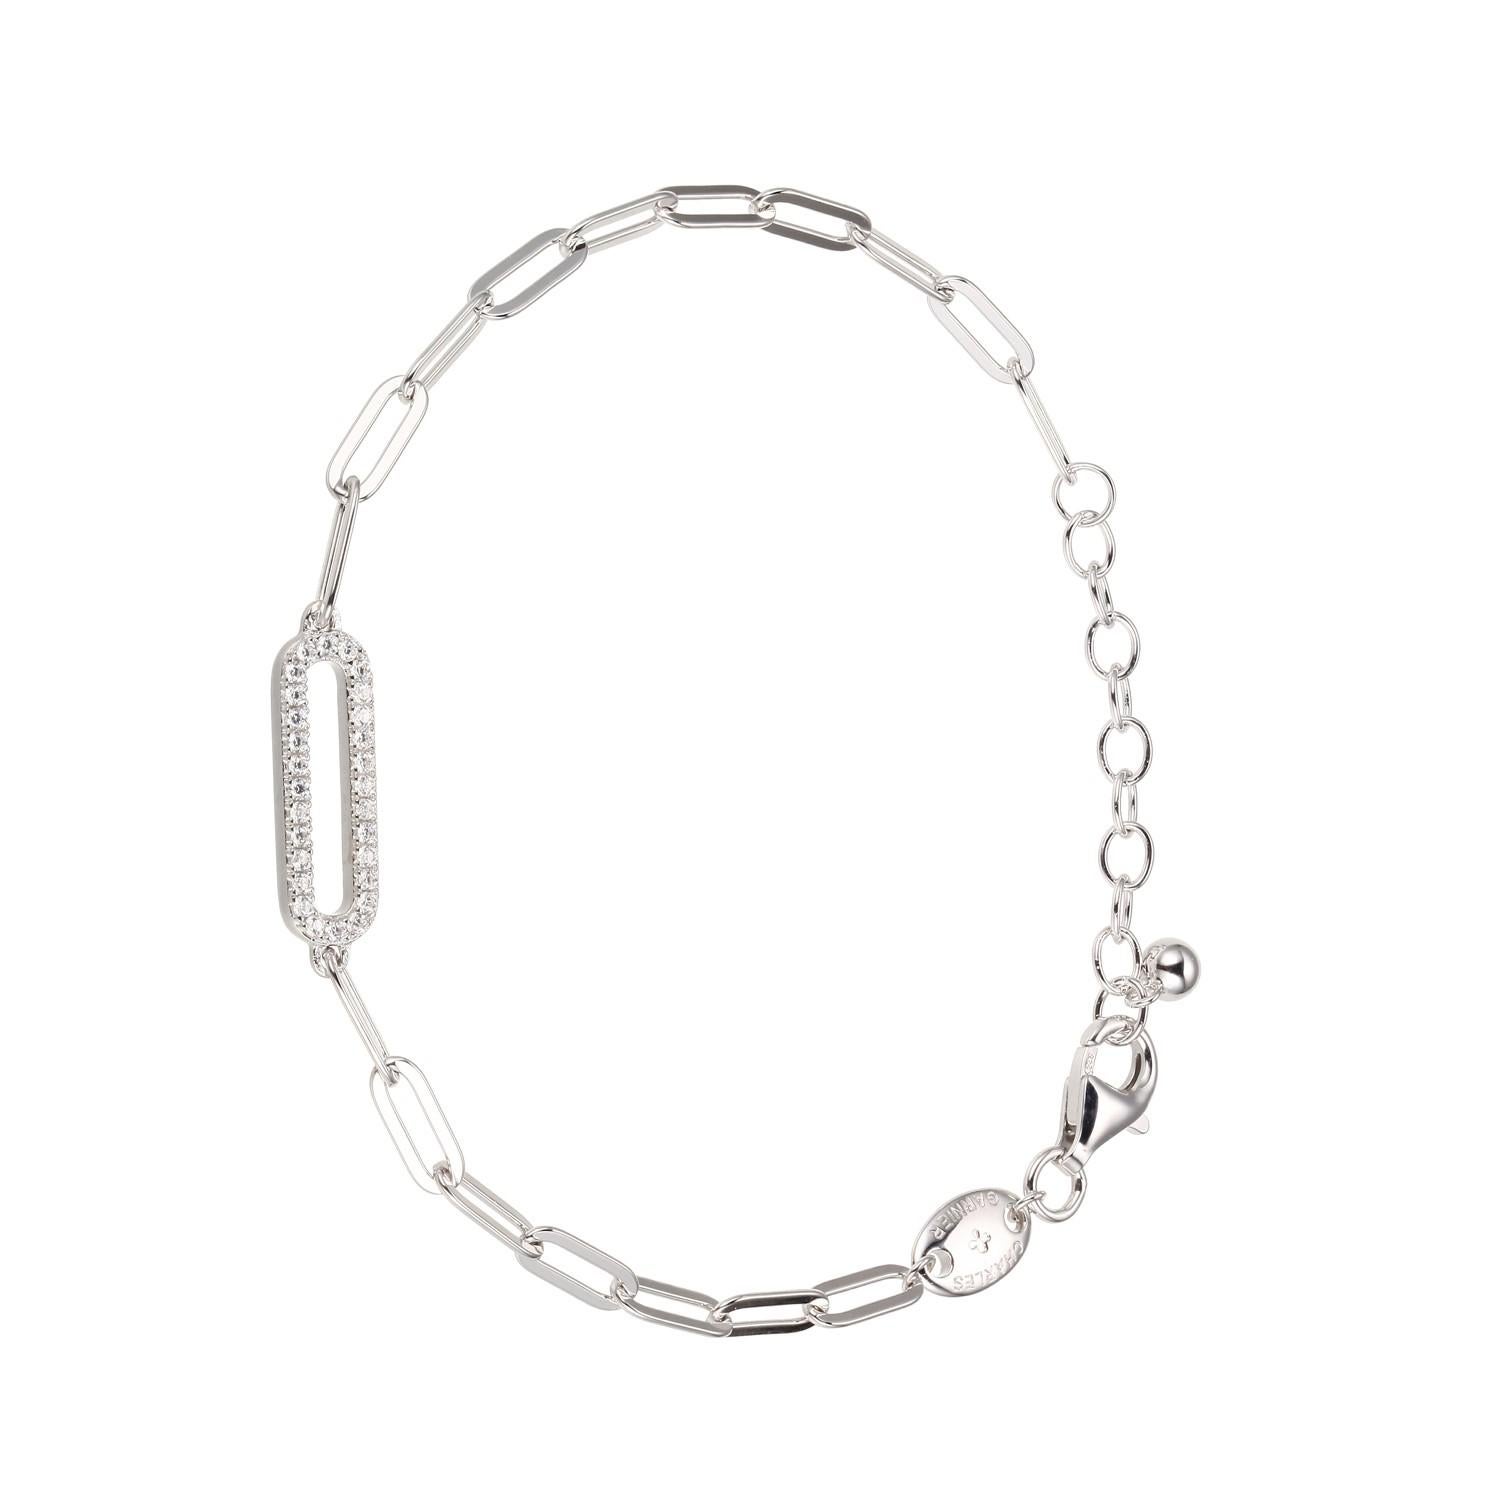 Sterling Silver Bracelet made with Paperclip Chain (3mm) and CZ Link in Center, Measures 6.75